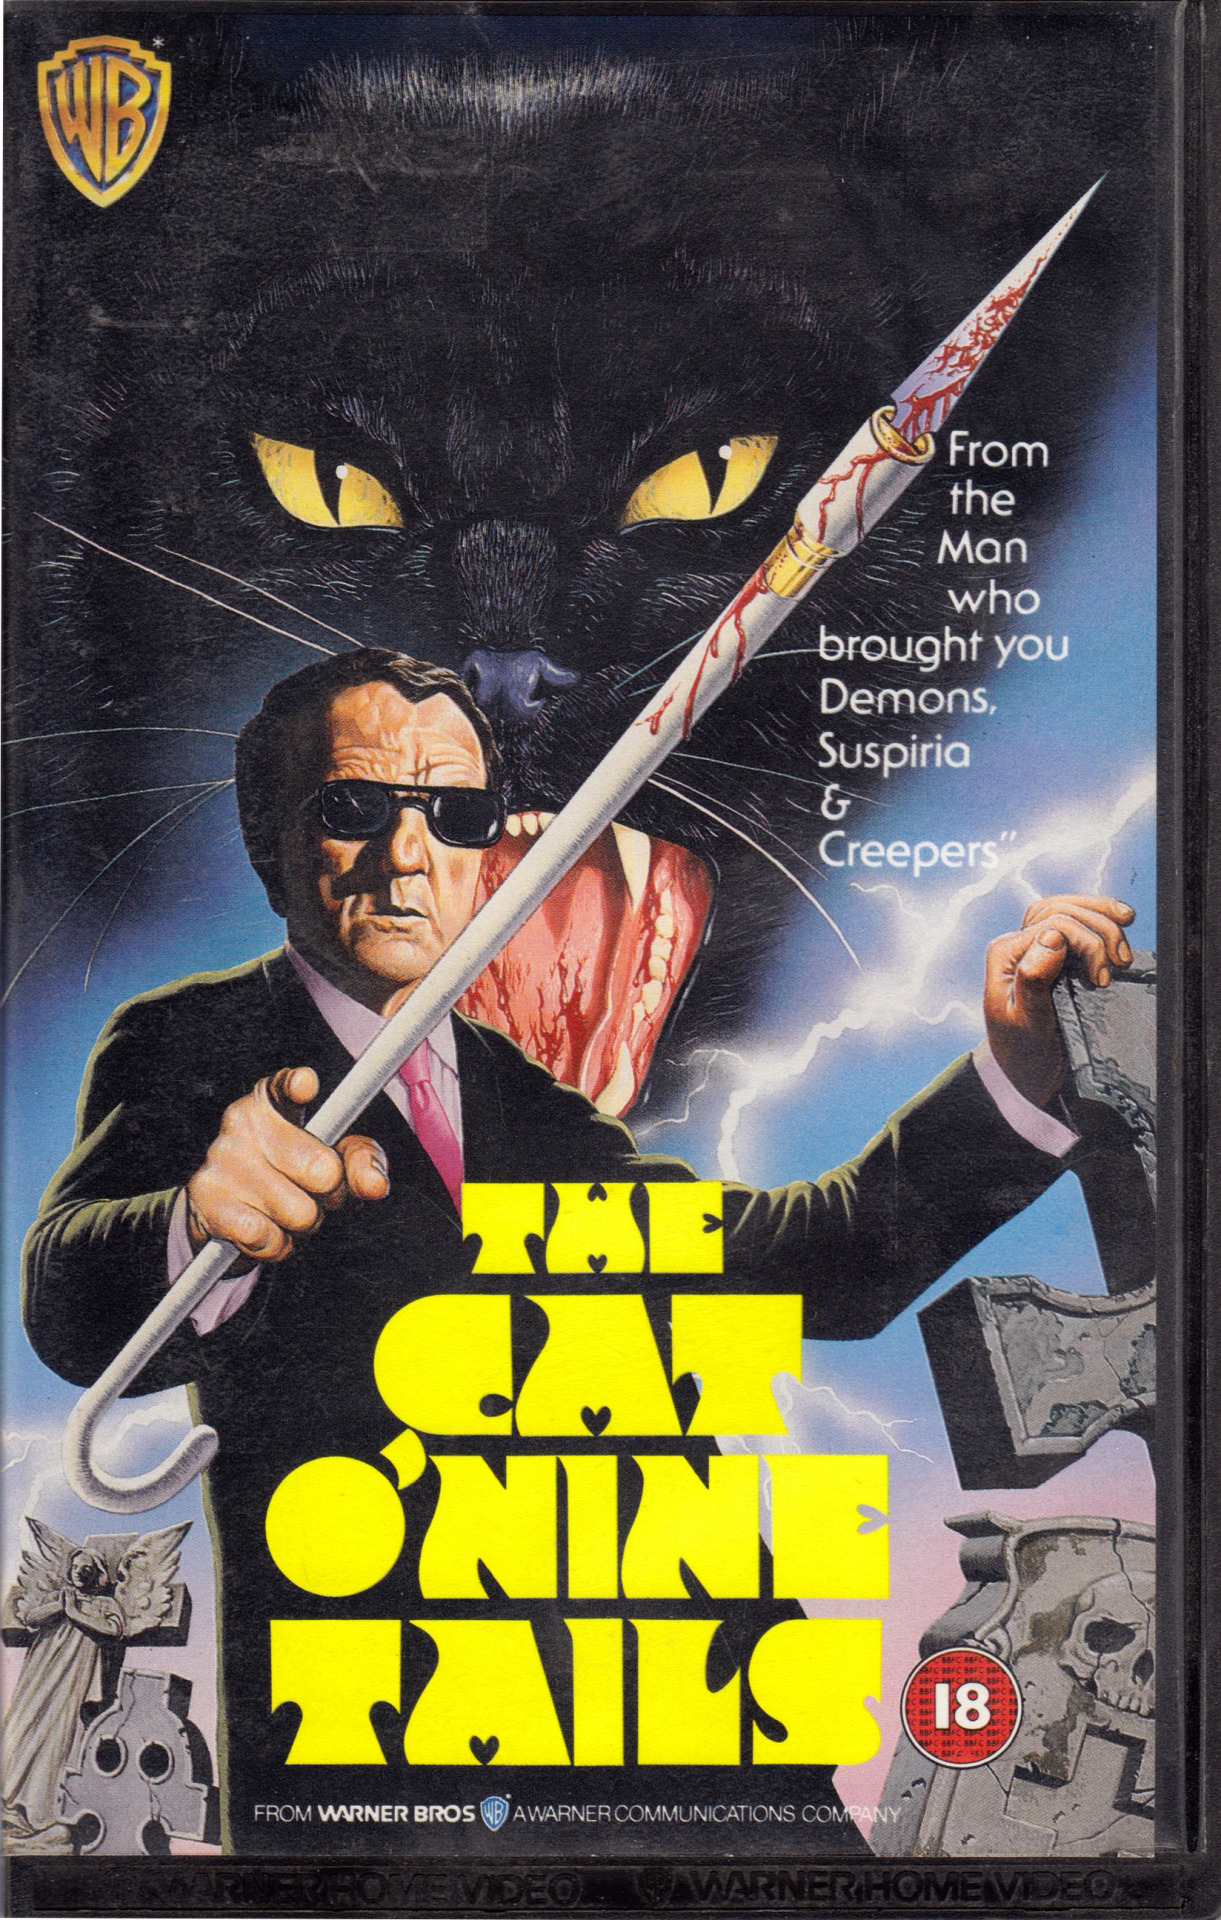 Cat O’Nine Tails, Directed by Dario Argento, VHS tape.(Warner Home Video, 1987)